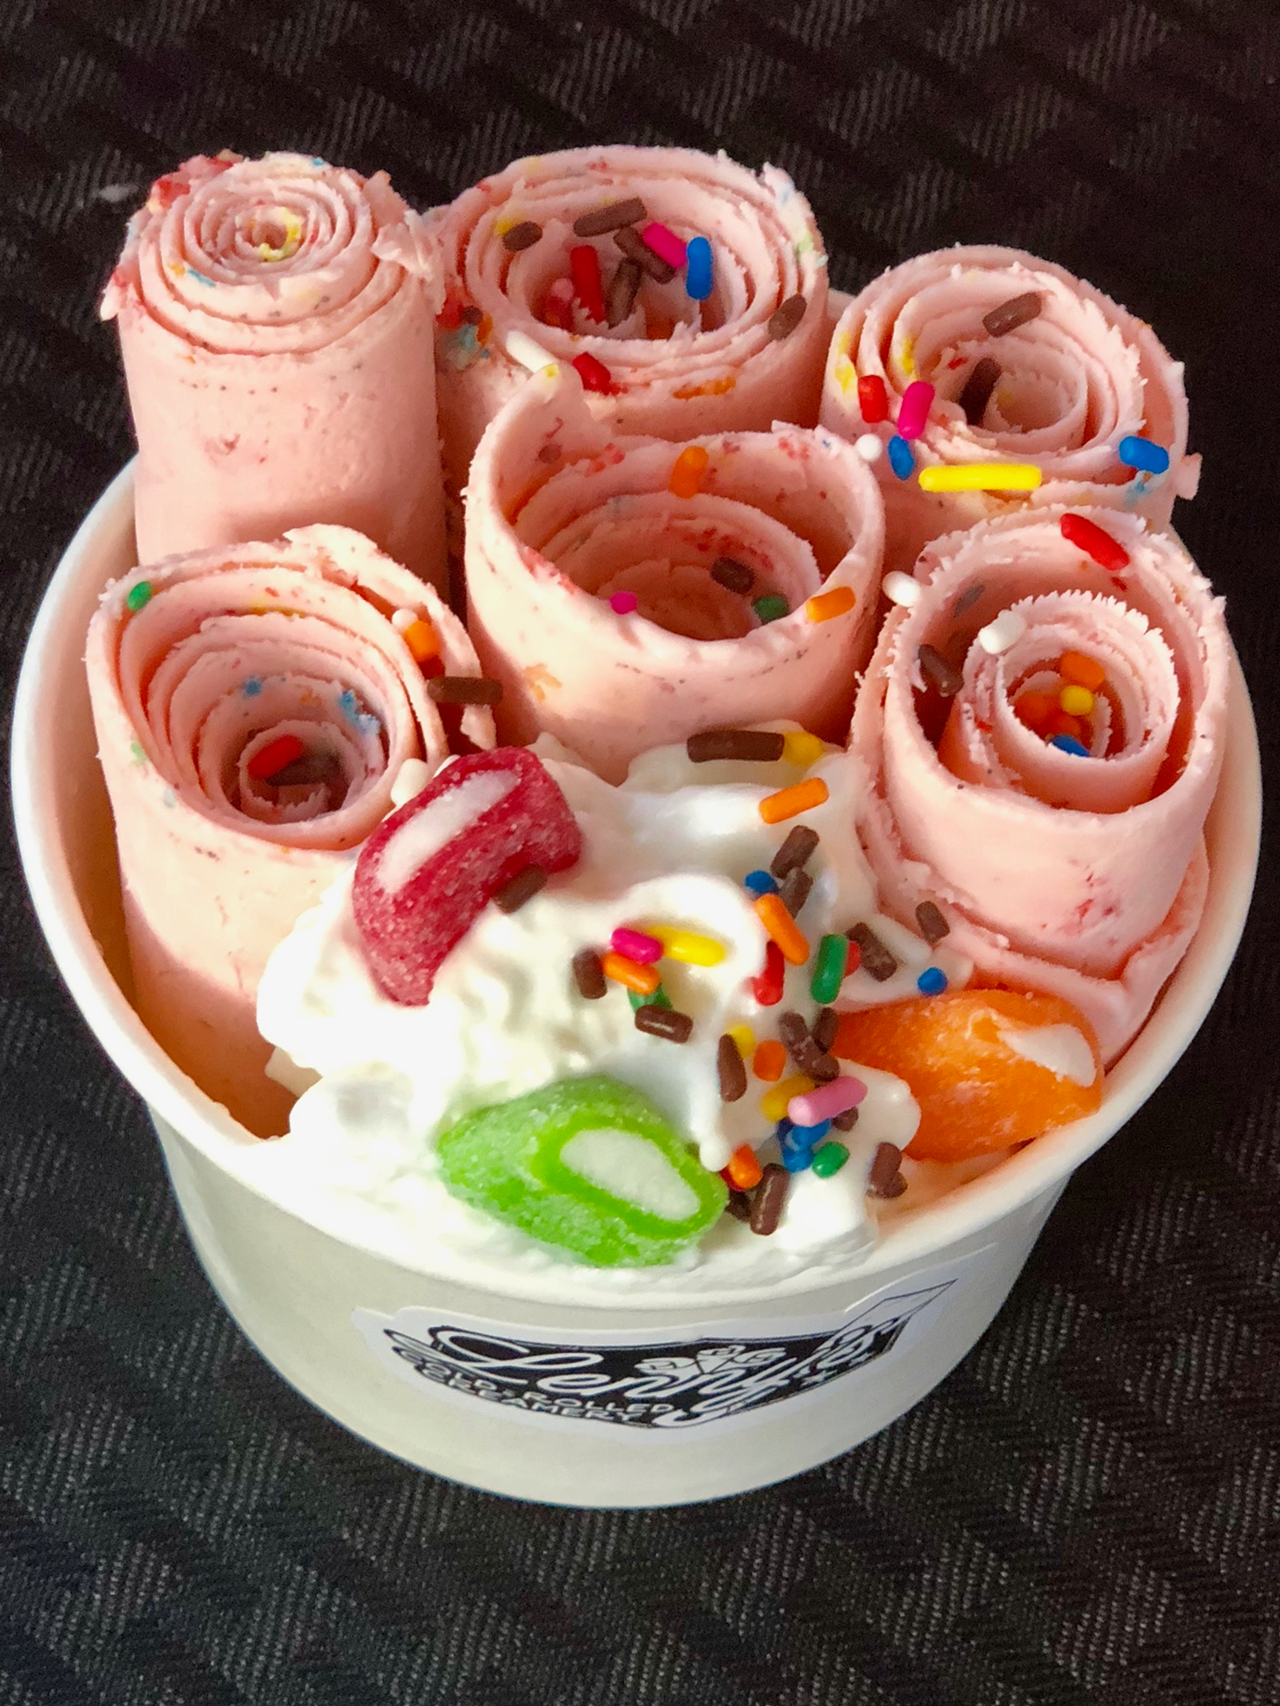 The "90s Kid" specialty ice cream choice from Lenny's Cold Rolled Creamery